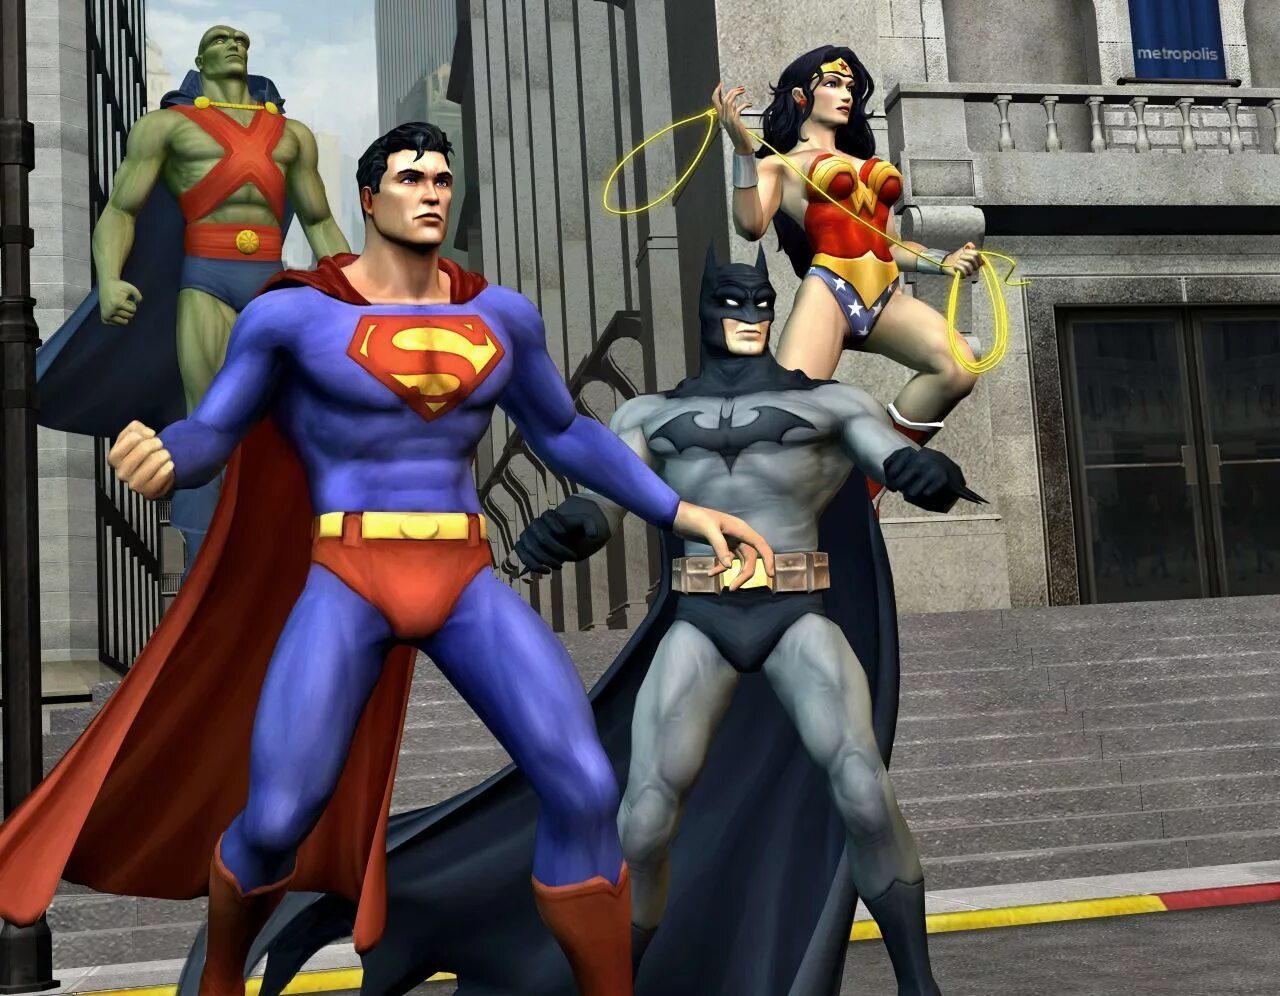 Justice League ps2. Justice League Heroes игра. Justice League Heroes 2006. Justice League 2 игра. Justice game